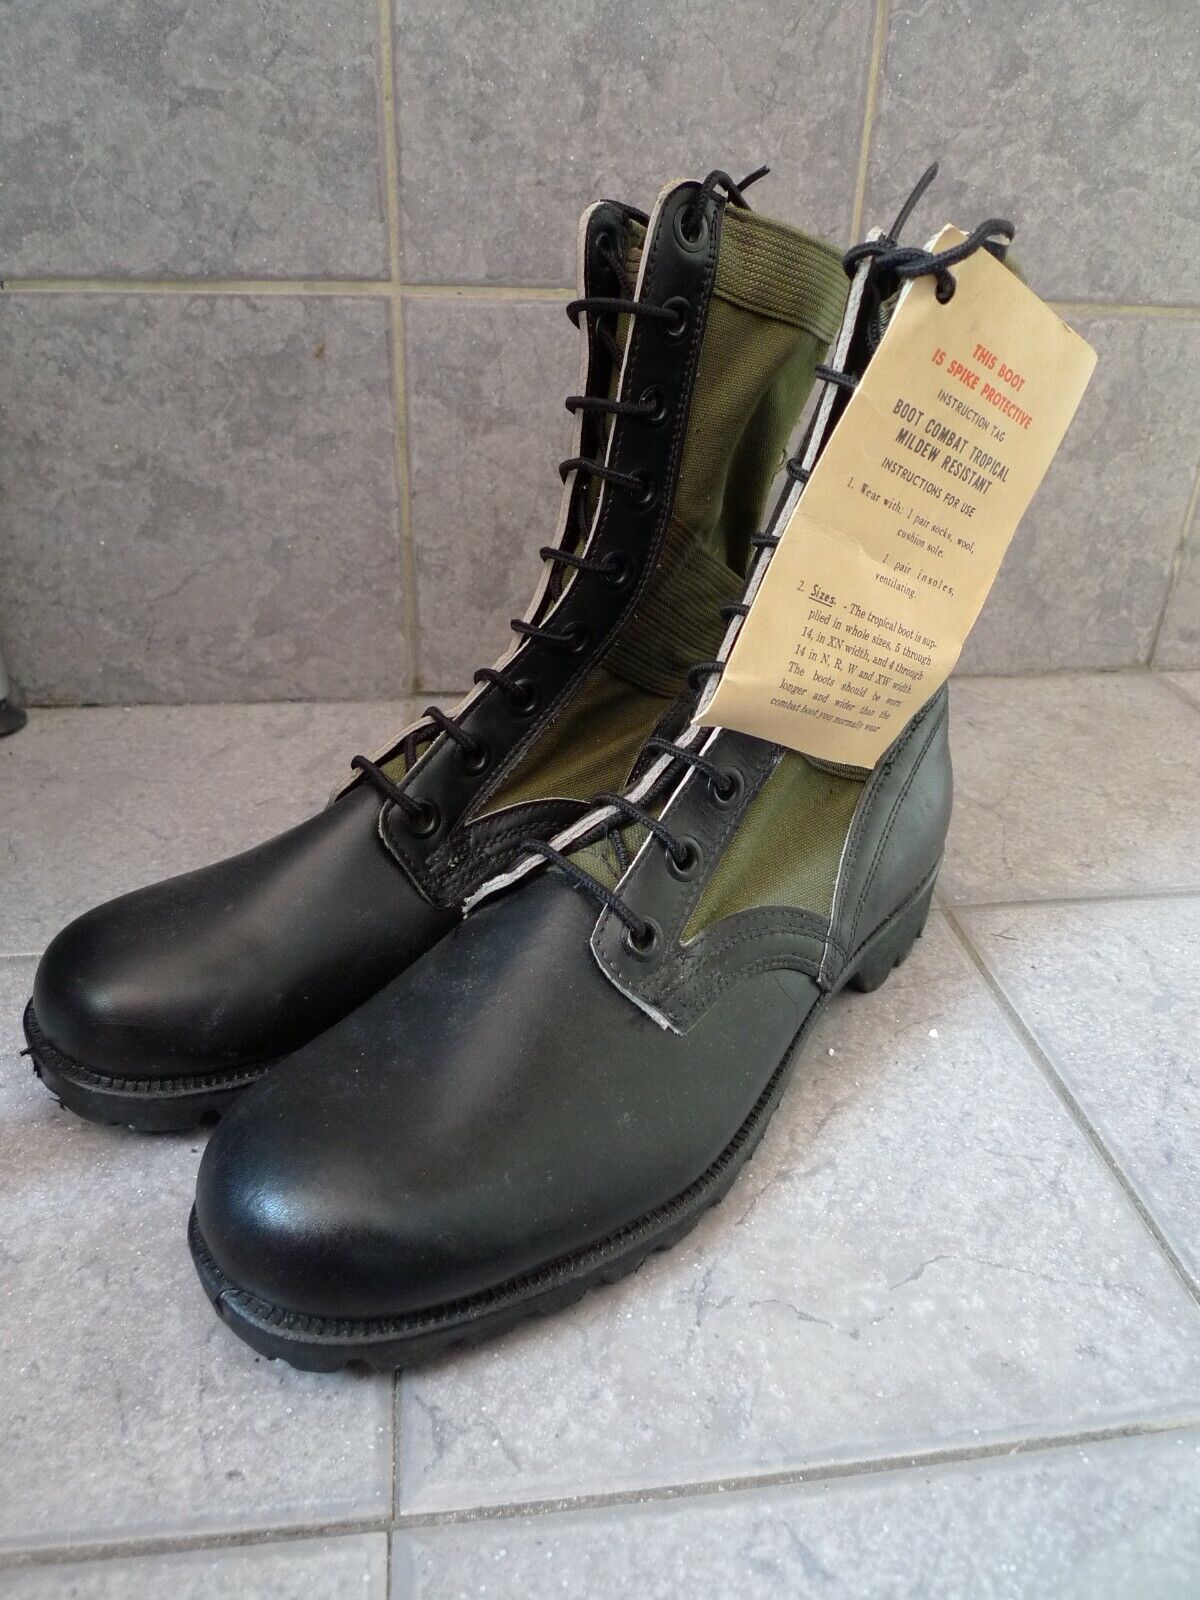 VIETNAM 1967 JUNGLE BOOTS BOTTES US ARMY SPIKE PROTECTIVE SIZE TAILLE 9 42.5 NOS